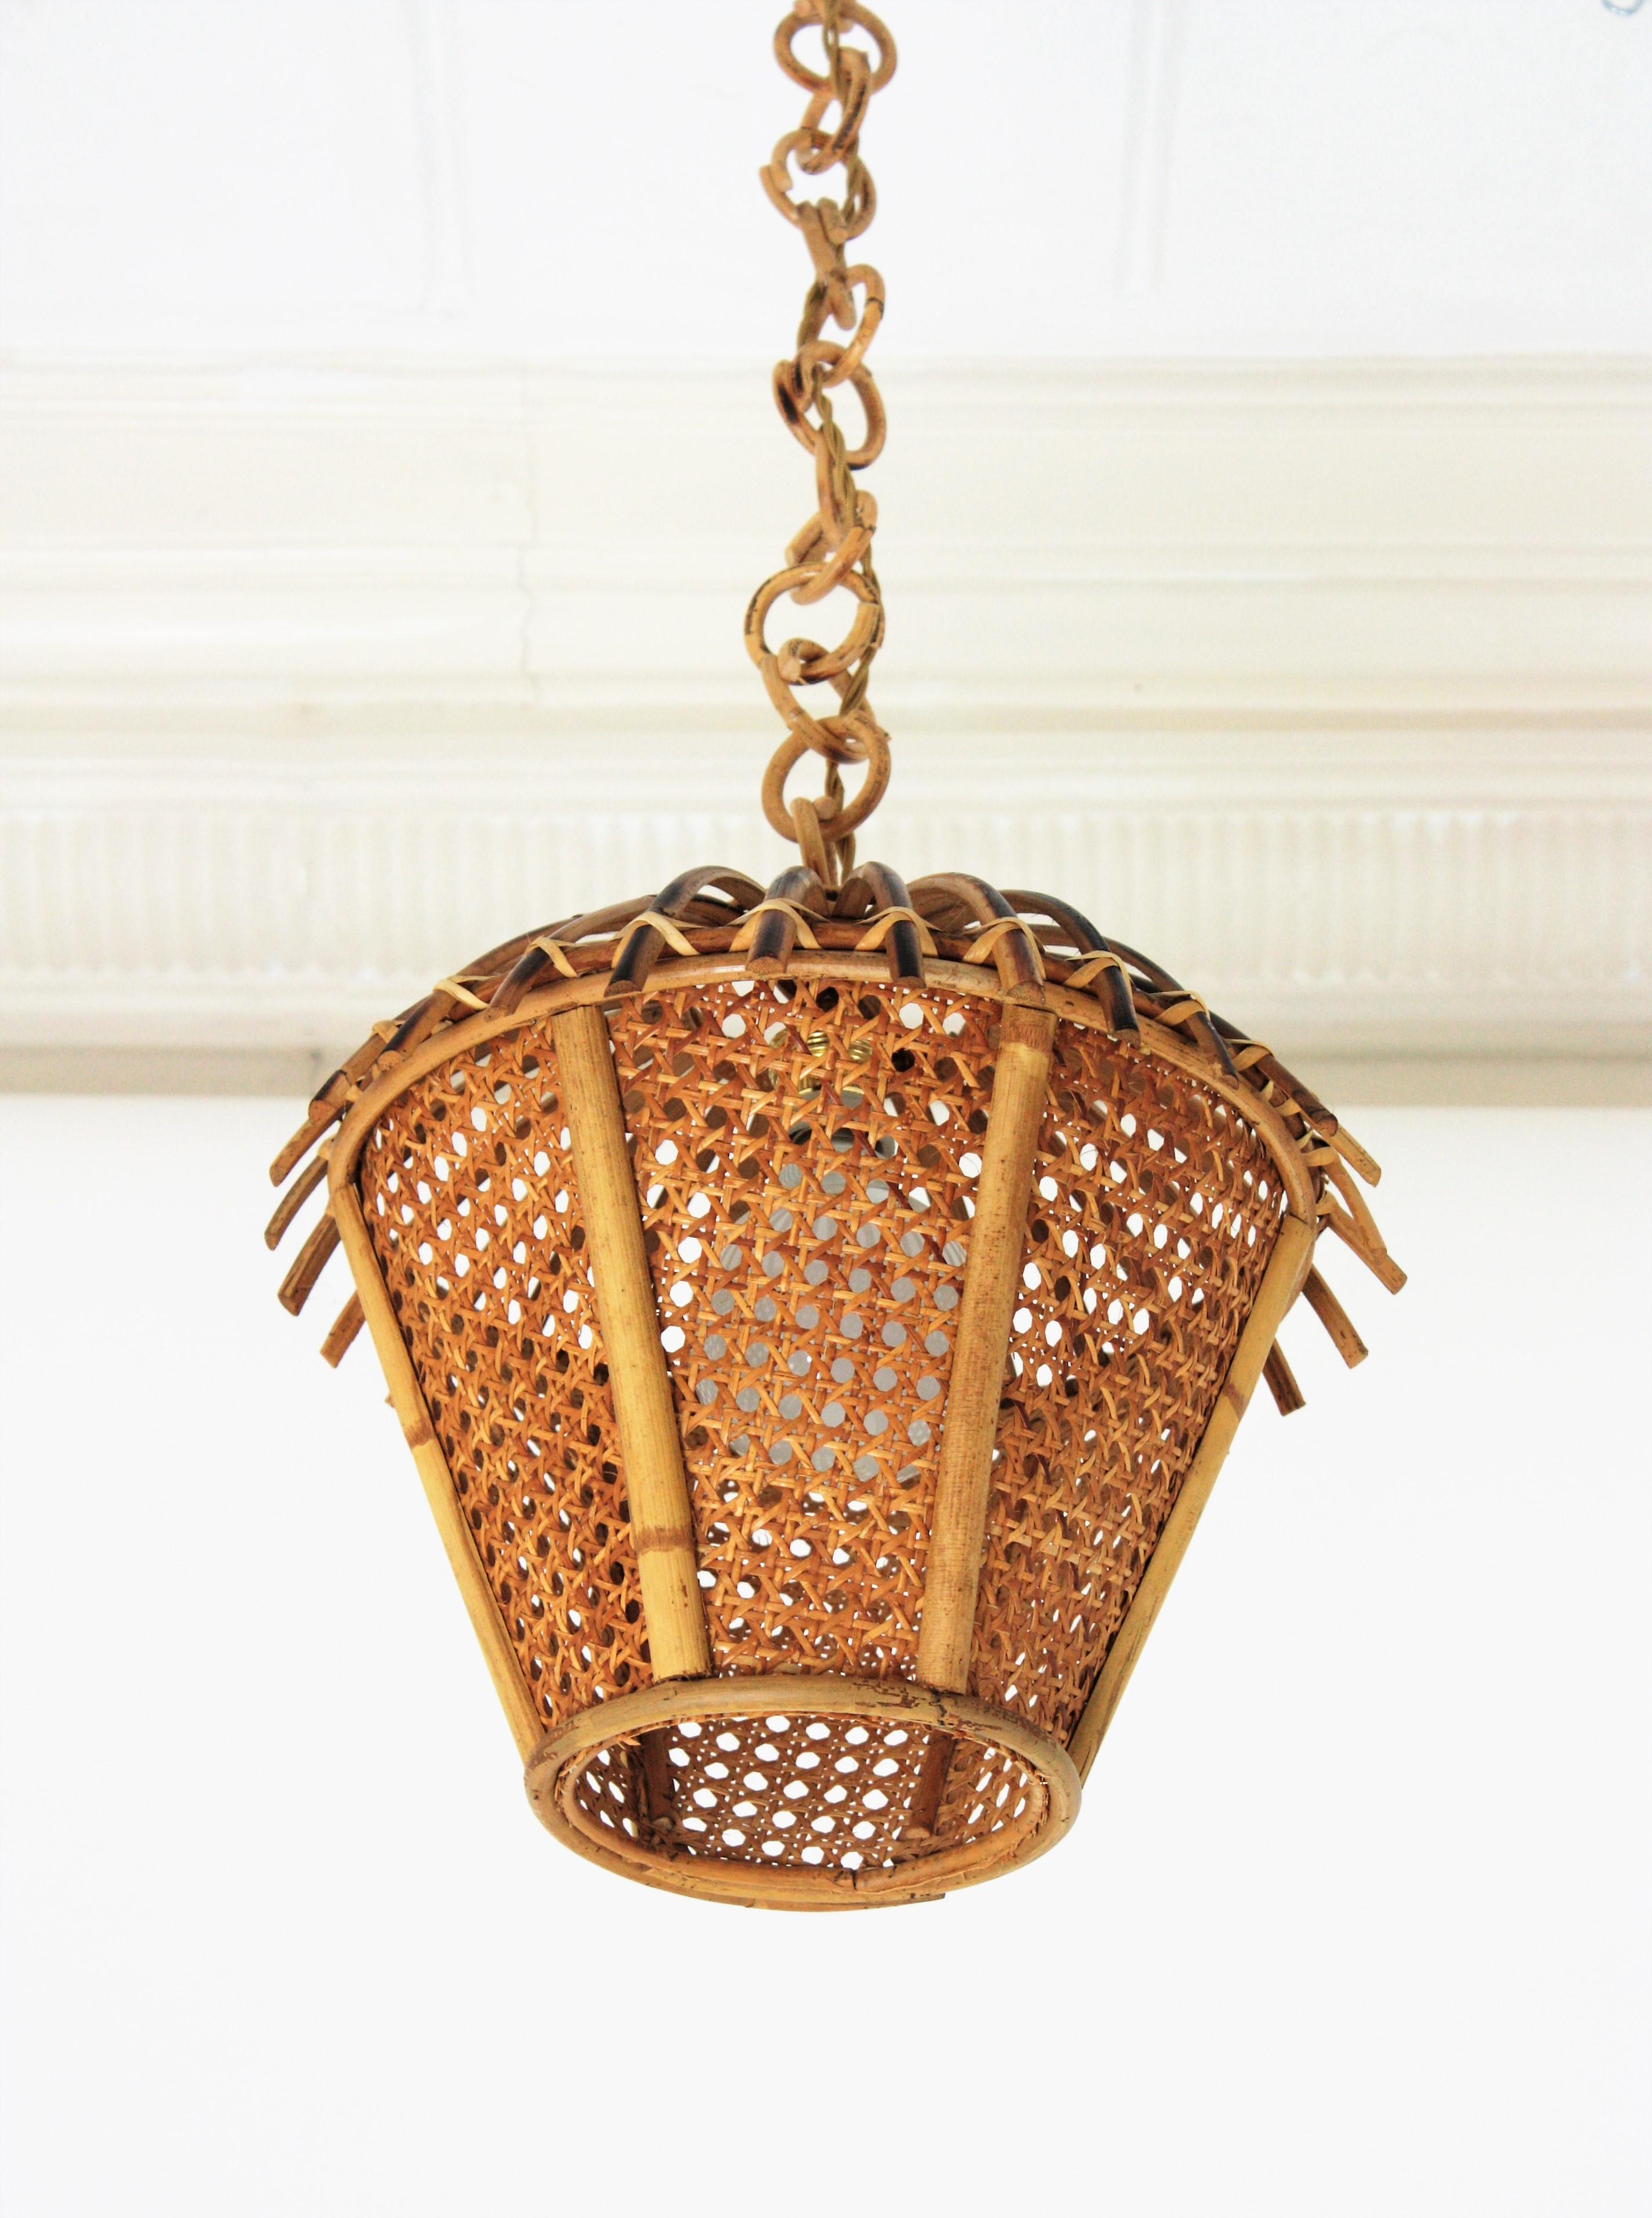 Mid-Century Modern Italian Modernist Rattan and Wicker Wire Pagoda Pendant or Hanging Light, 1960s For Sale